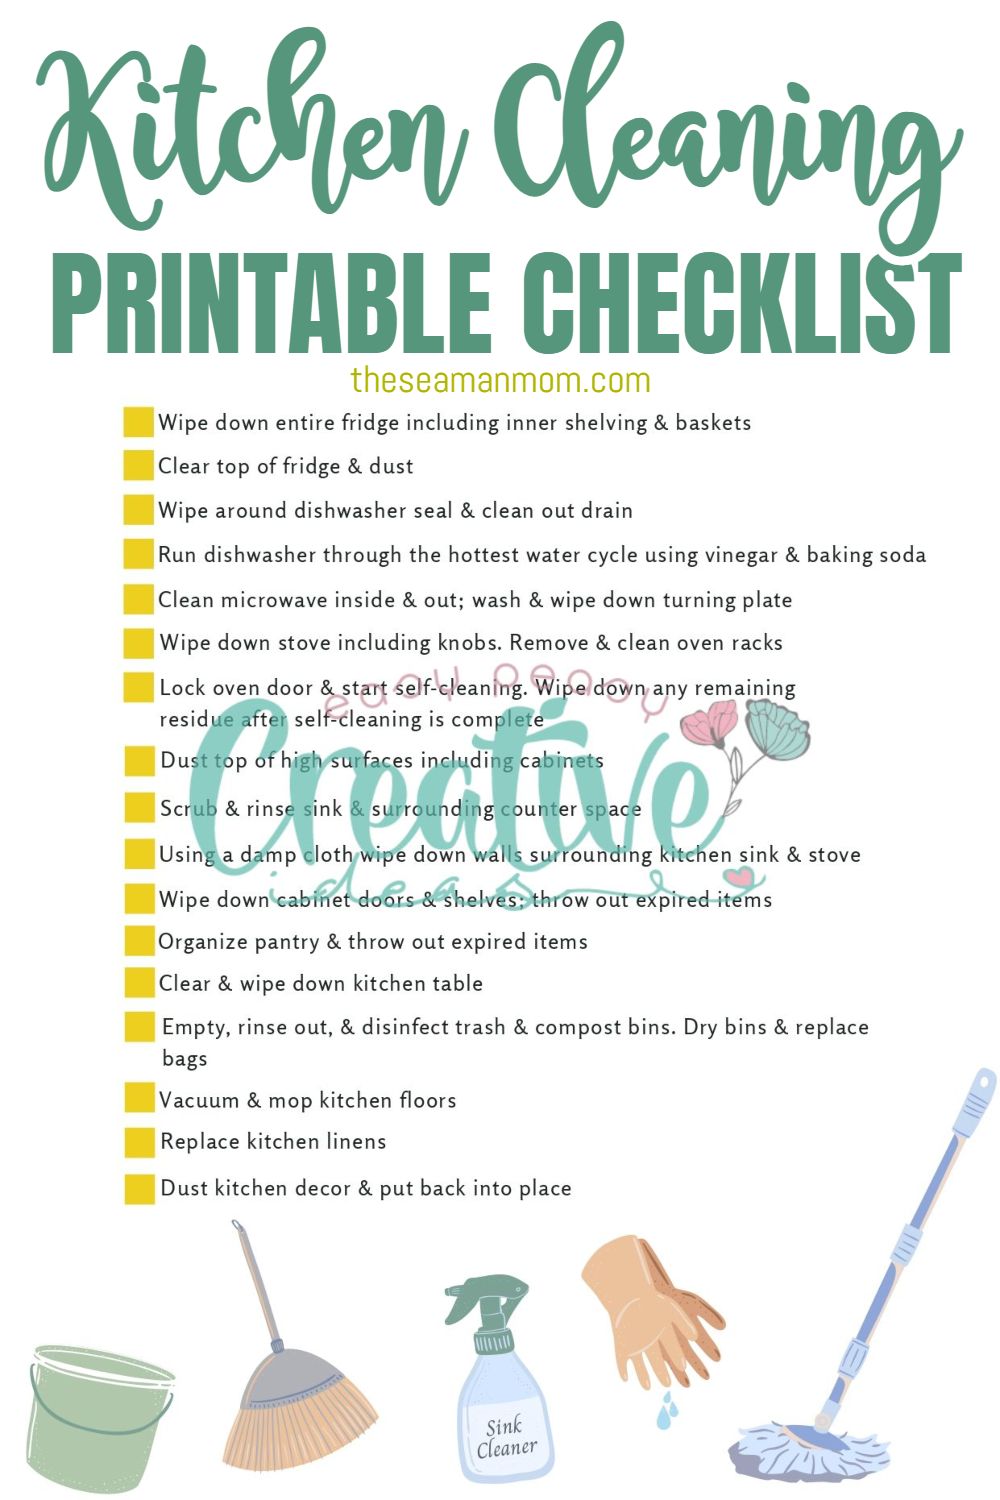 Keep your kitchen sparkling clean with our kitchen cleaning checklist. It's the perfect tool for a tidy and organized space.